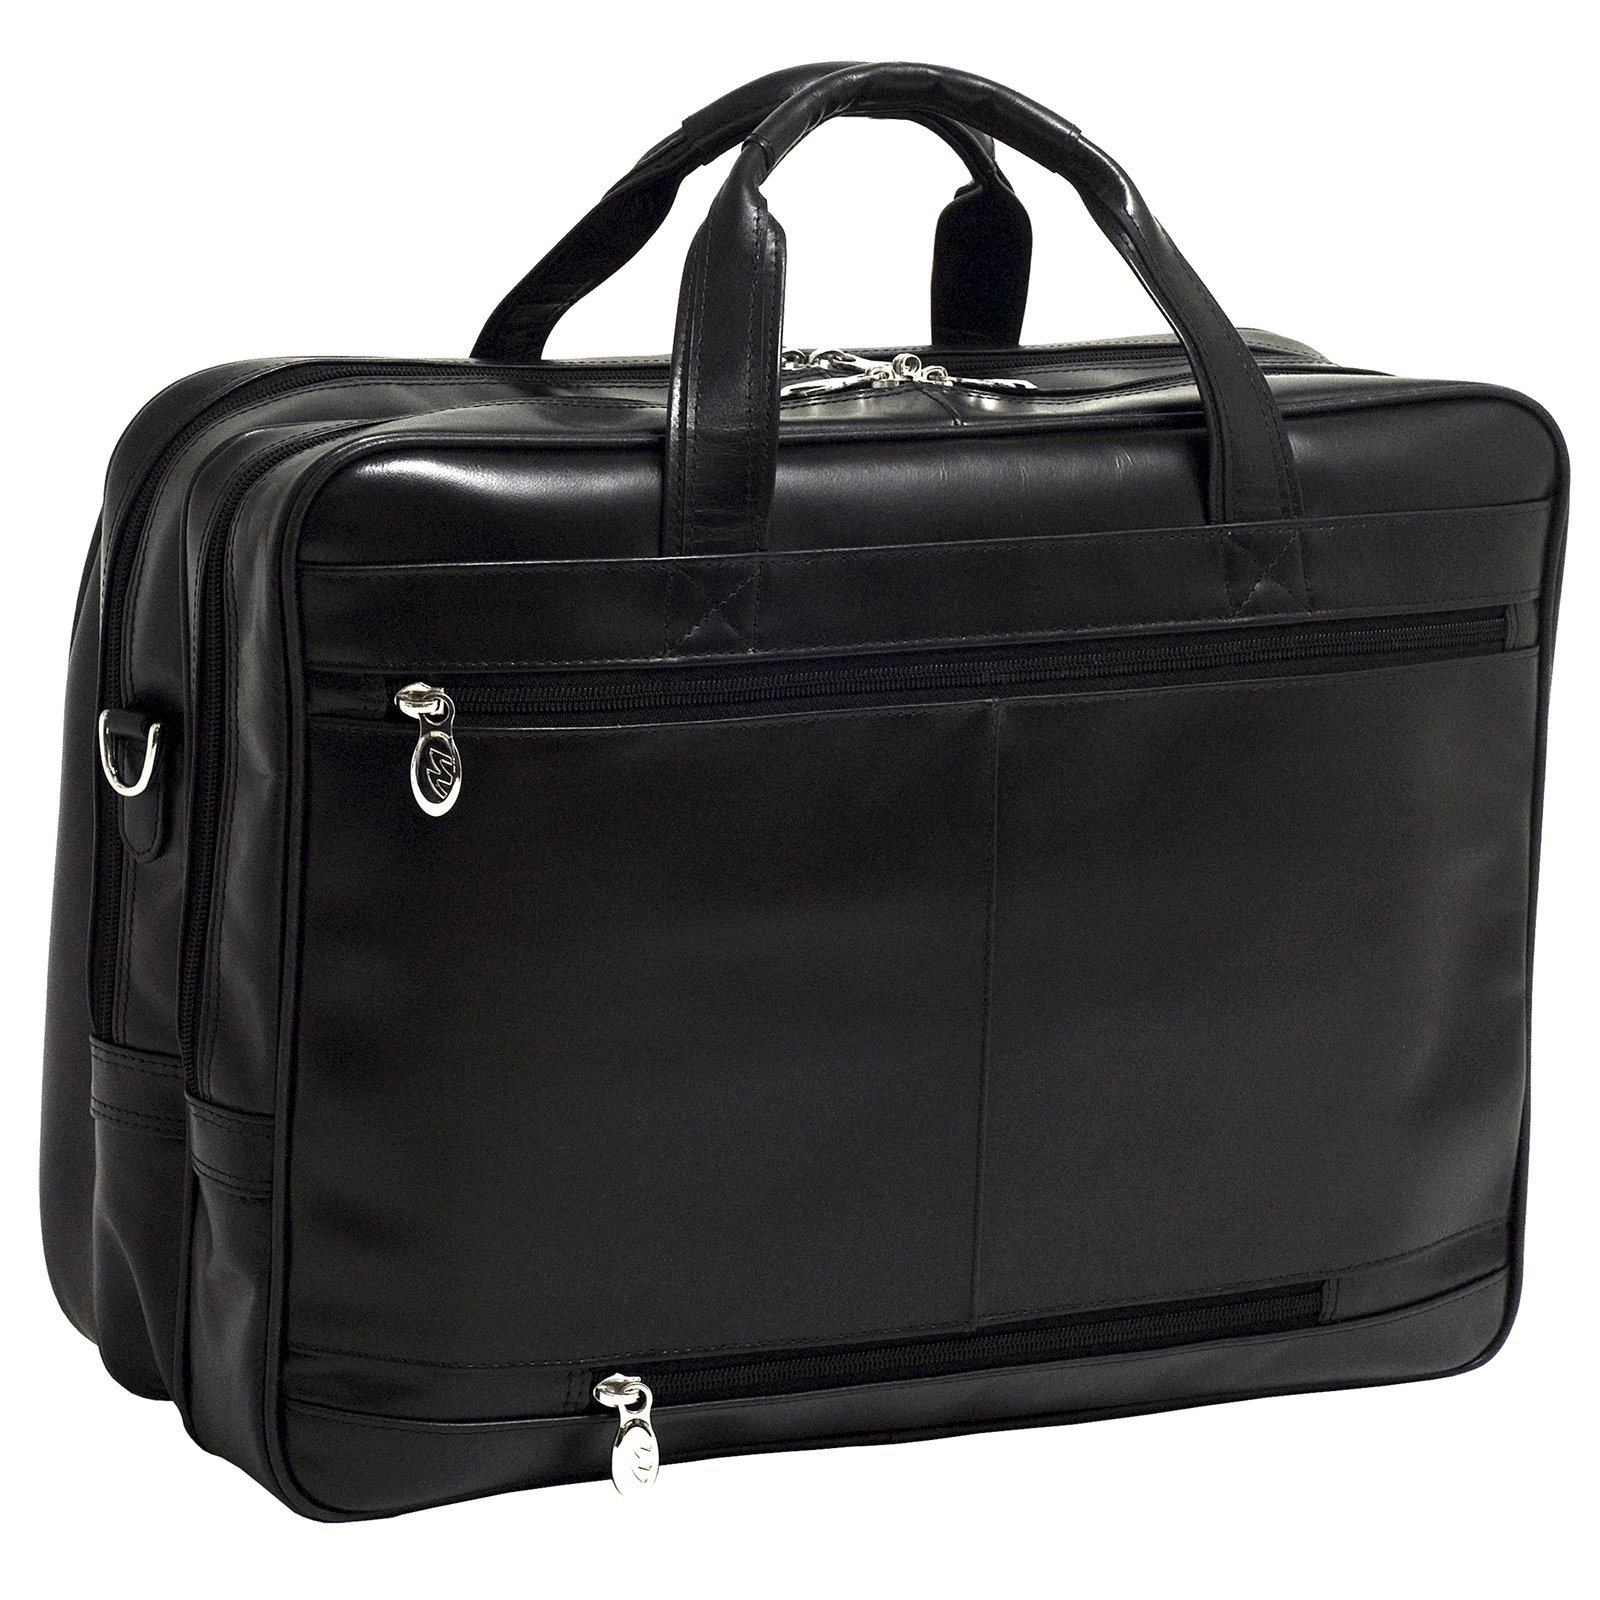 McKlein ROCKFORD, Checkpoint-Friendly Laptop Briefcase, Top Grain Cowhide Leather, Black (86515) - image 5 of 6